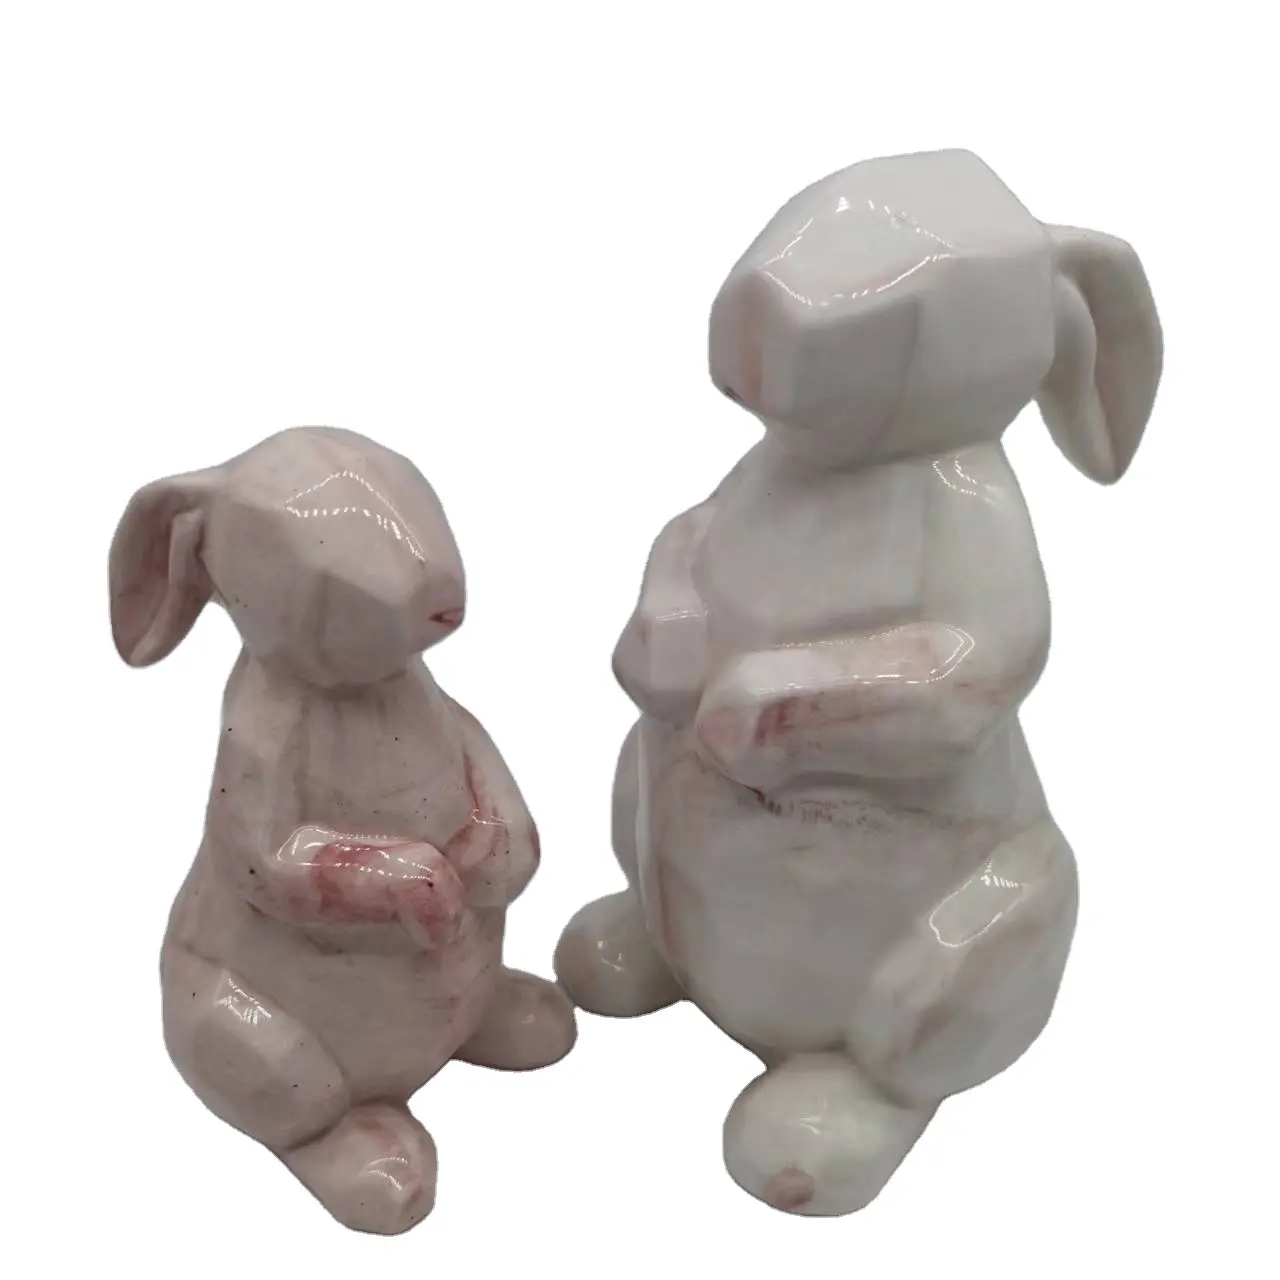 Statue ceramic small rabbits set2 ceramic for sale folk art and style Europe